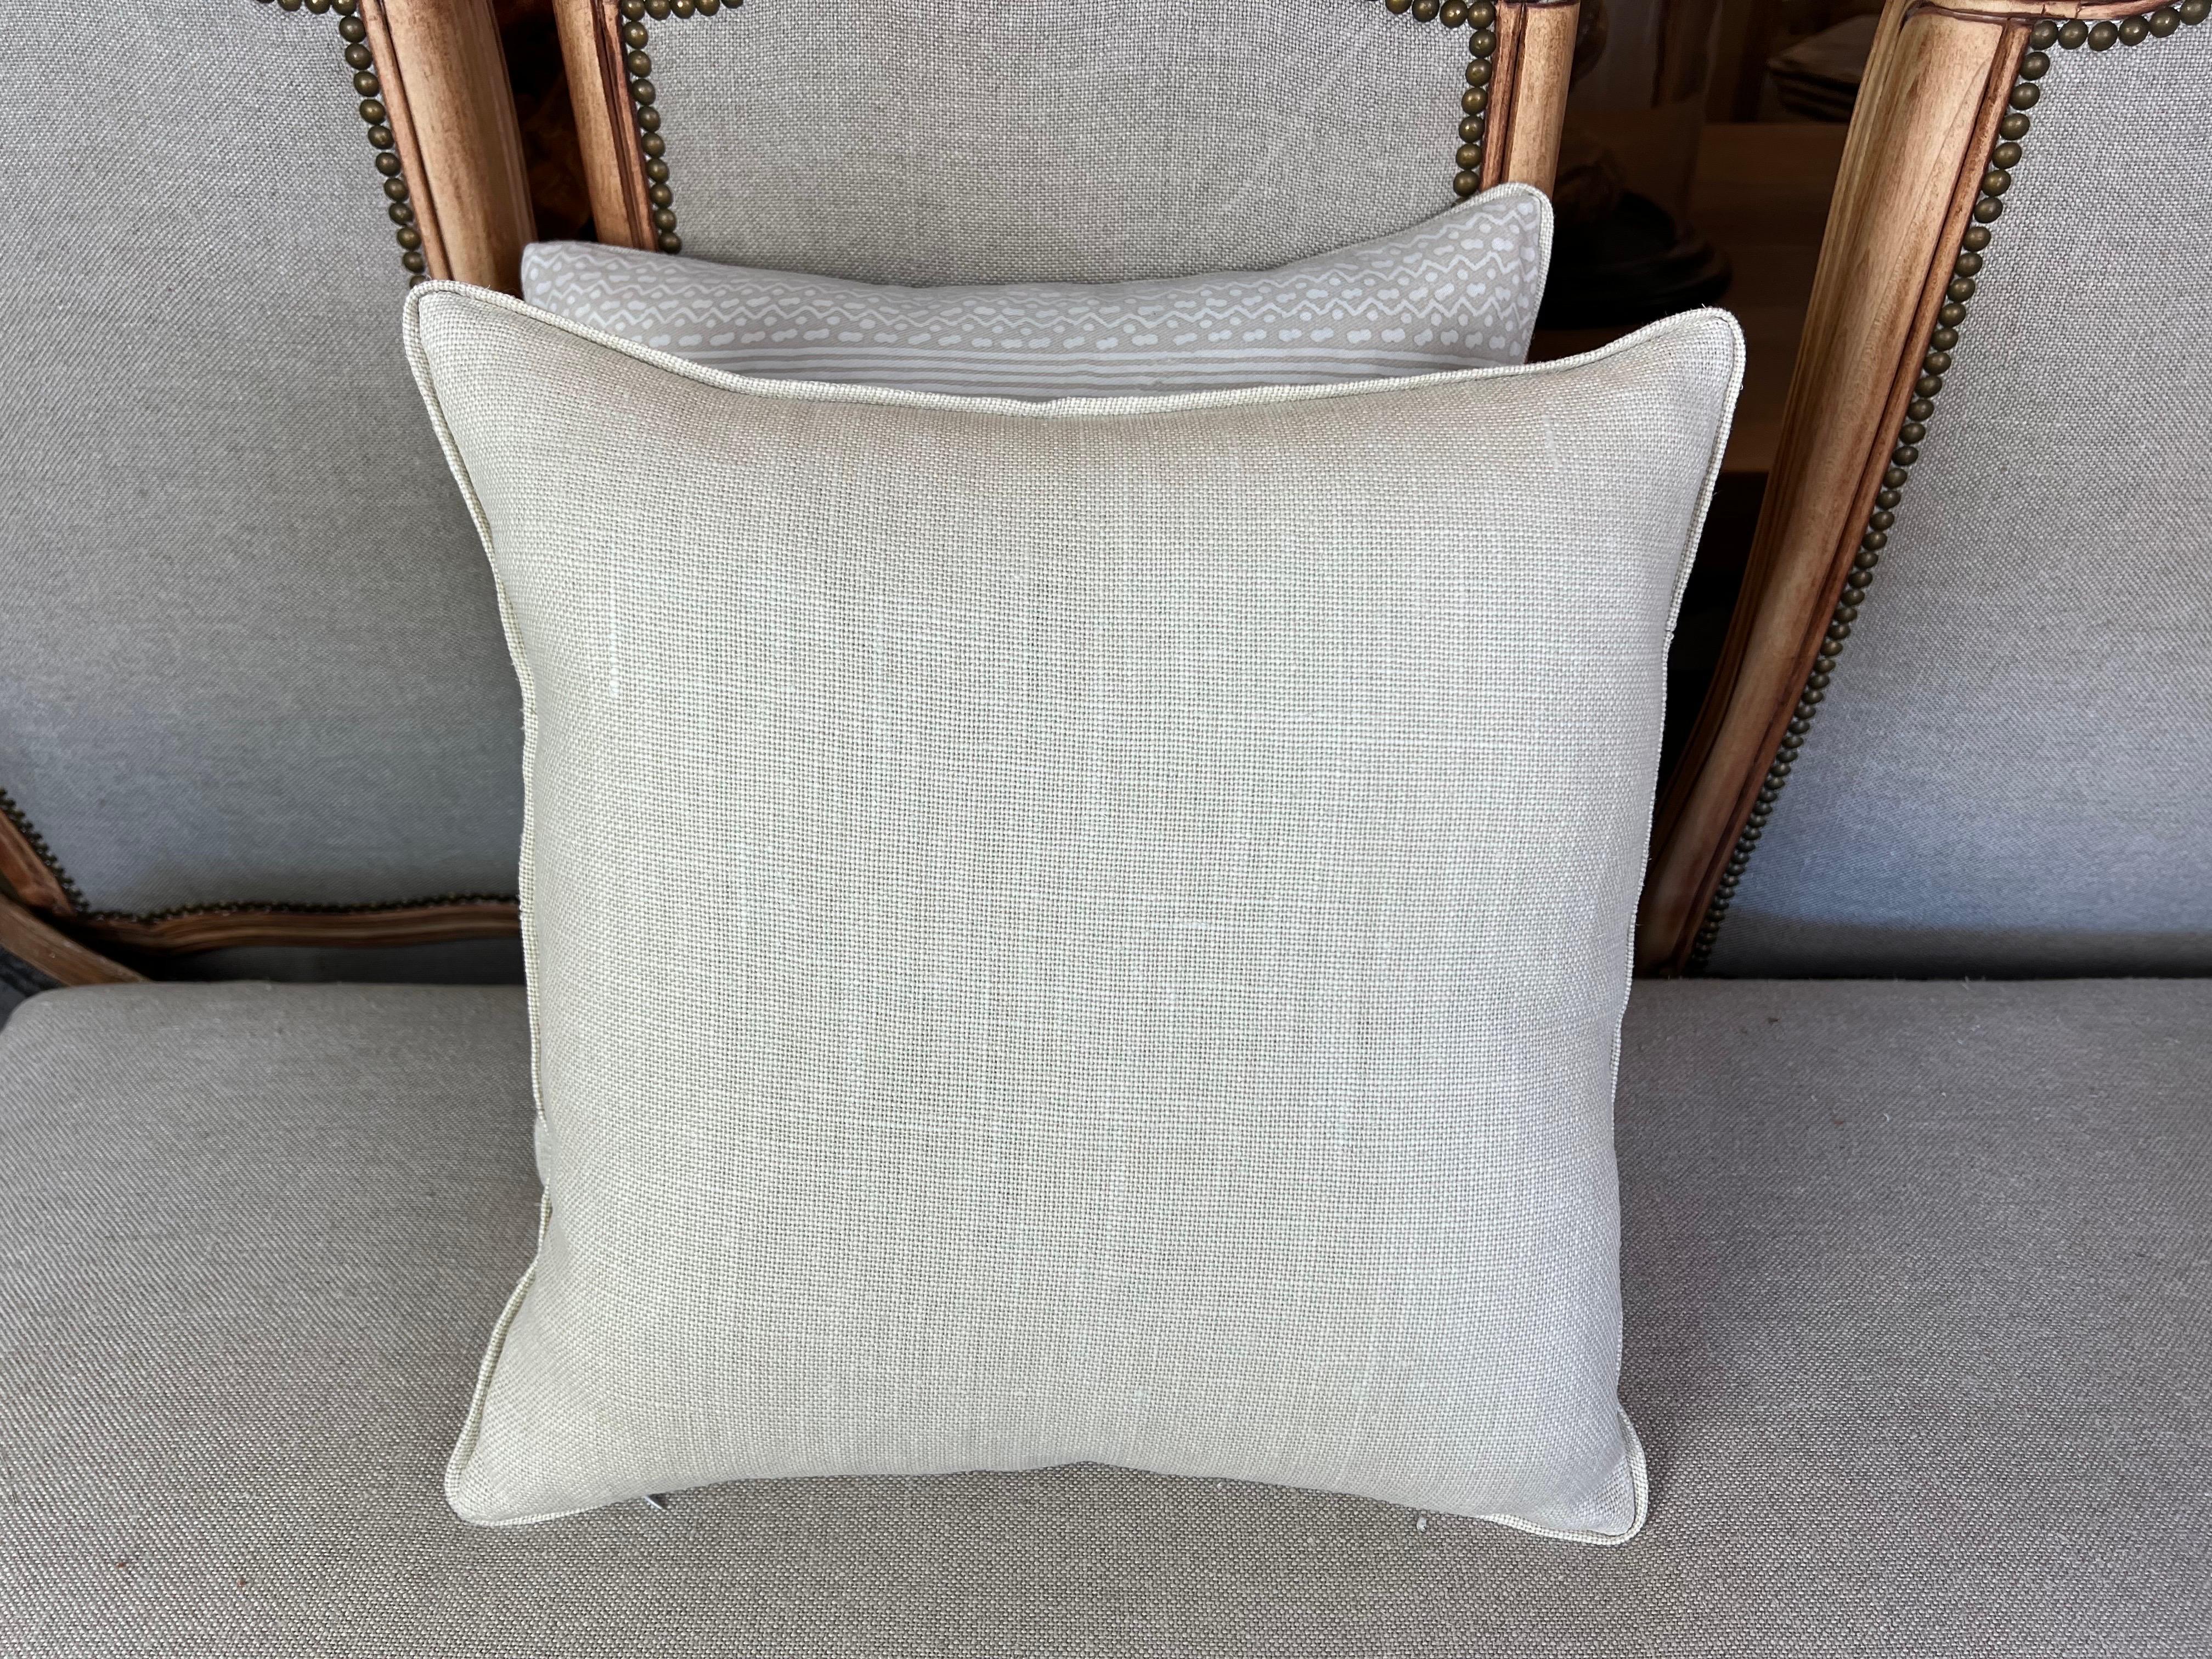 Contemporary Tapa Stripe Patterned Fortuny Textile Pillows w/ Linen Backs, Pair For Sale